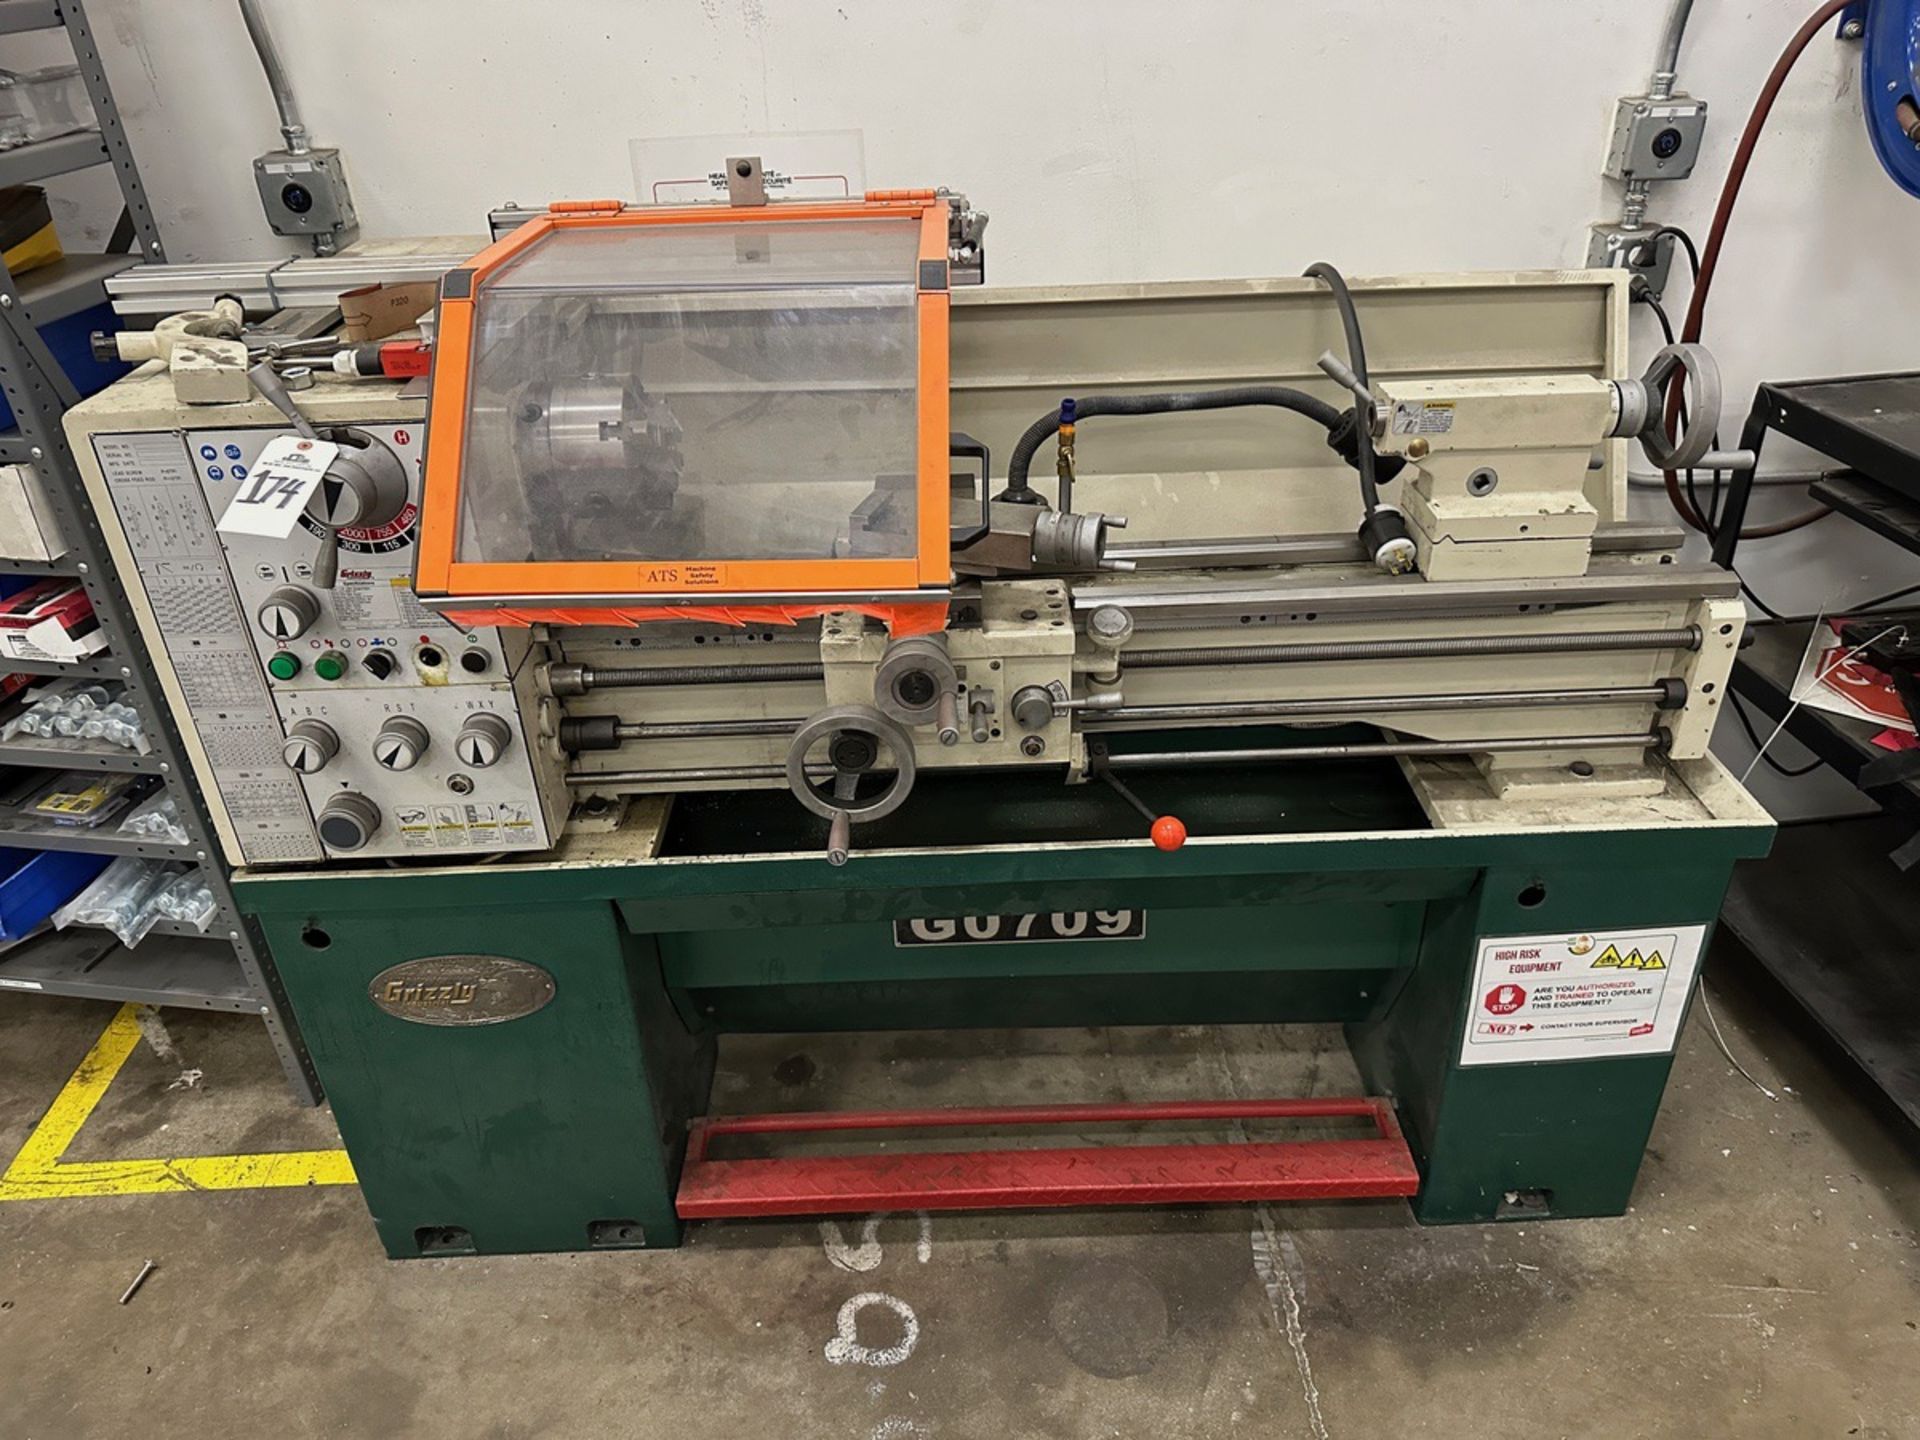 Grizzly GO709 14" x 40" Gunsmithing Gearhead Lathe | Rig Fee $500 - Image 2 of 6